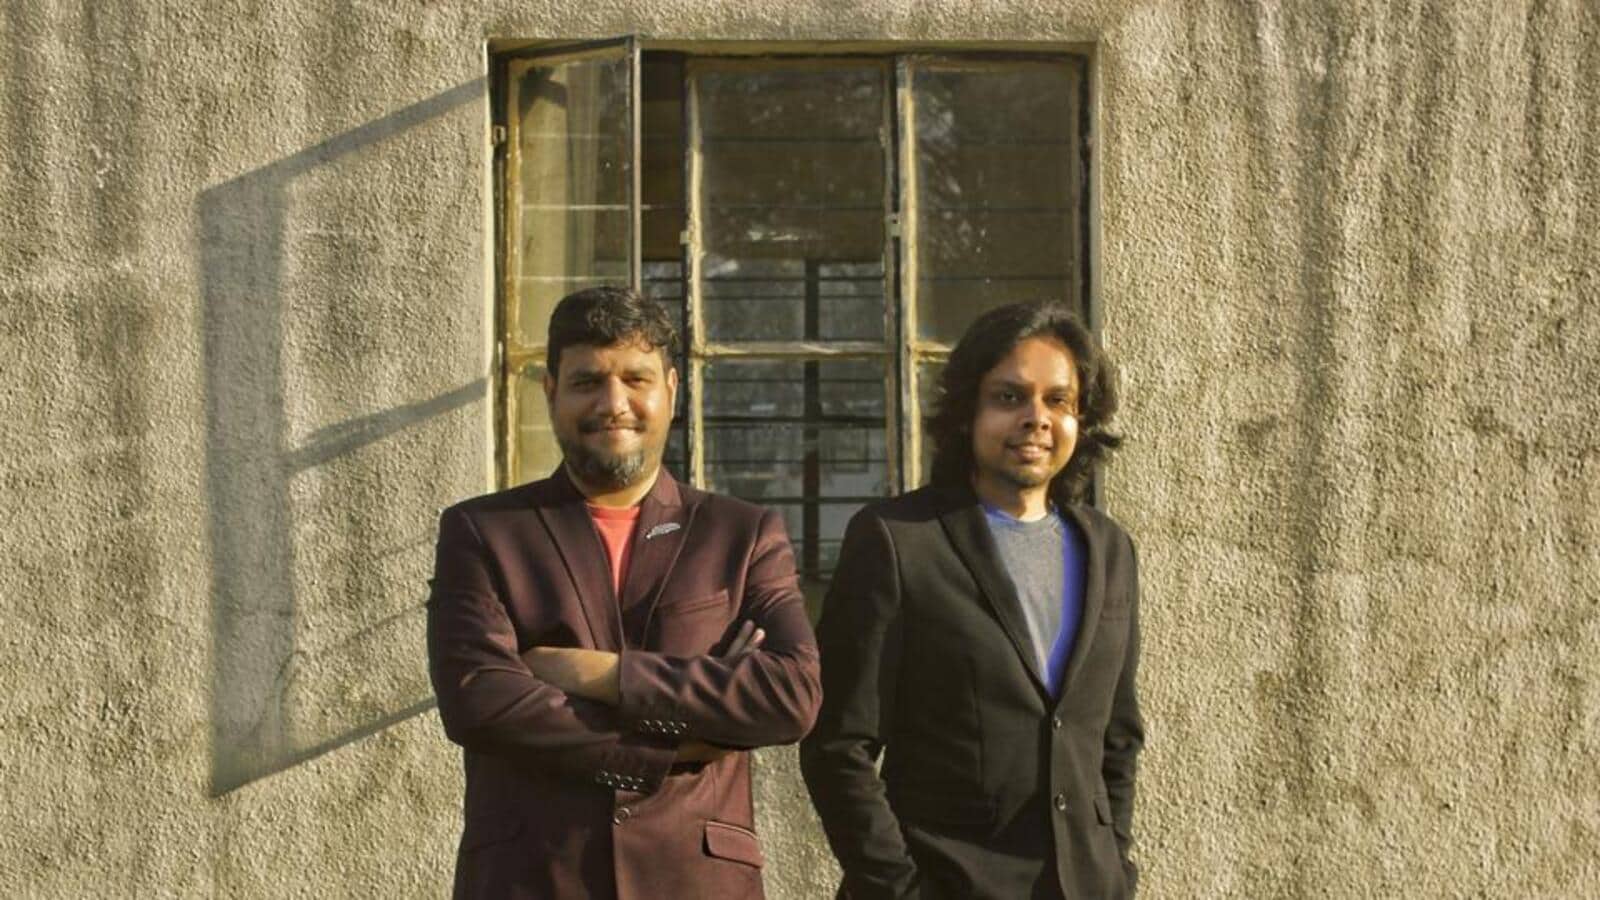 Pune’s Harshad Sathe and Saket Rao feel there is lack of venues in the city